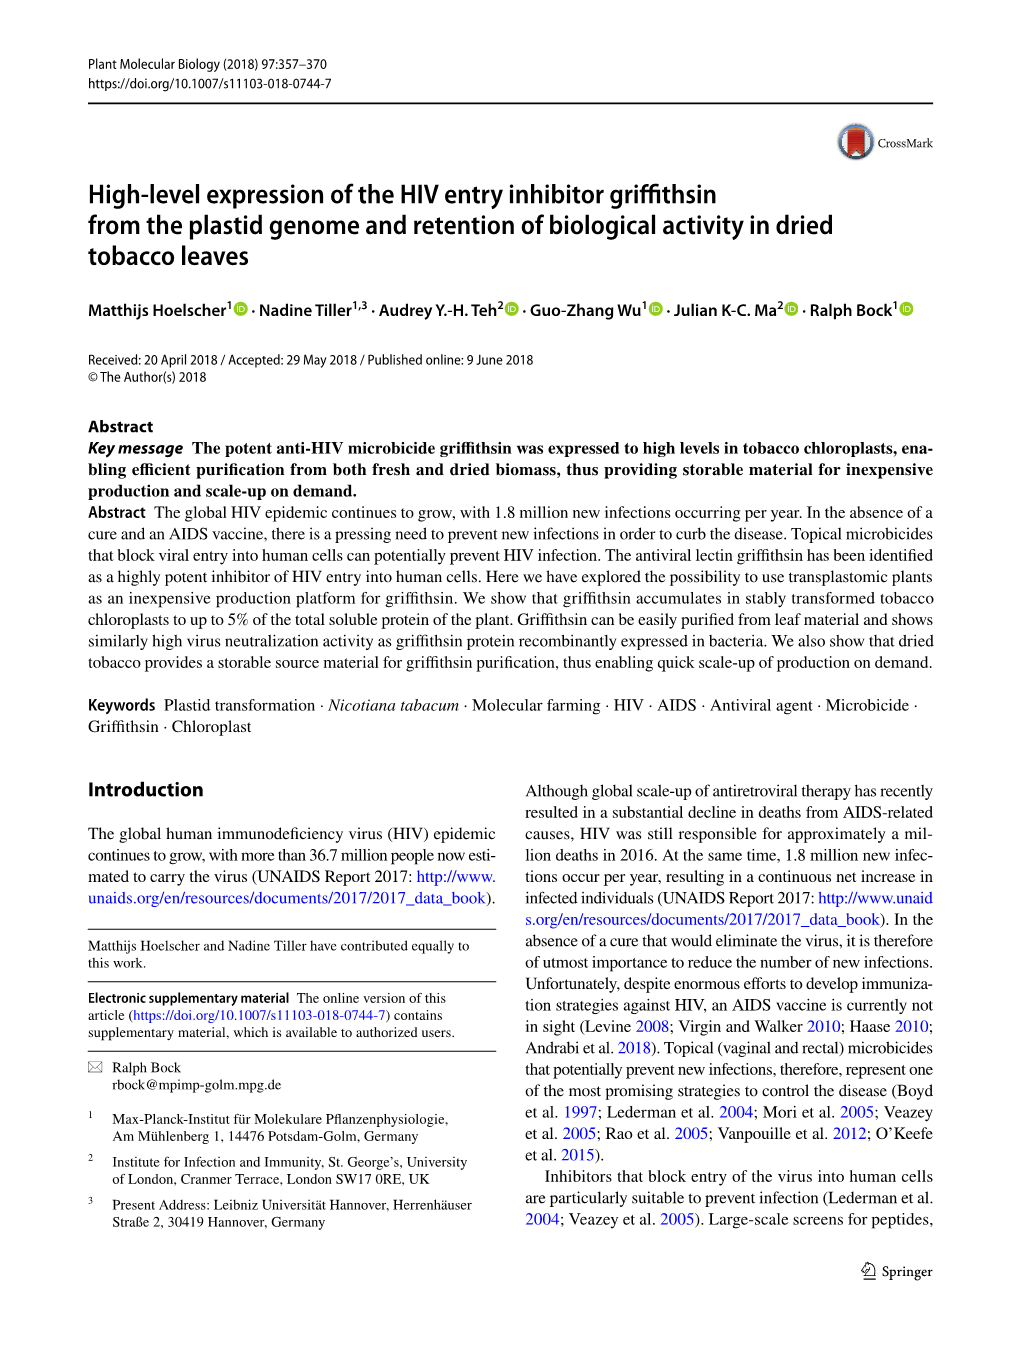 High-Level Expression of the HIV Entry Inhibitor Griffithsin from the Plastid Genome and Retention of Biological Activity in Dried Tobacco Leaves